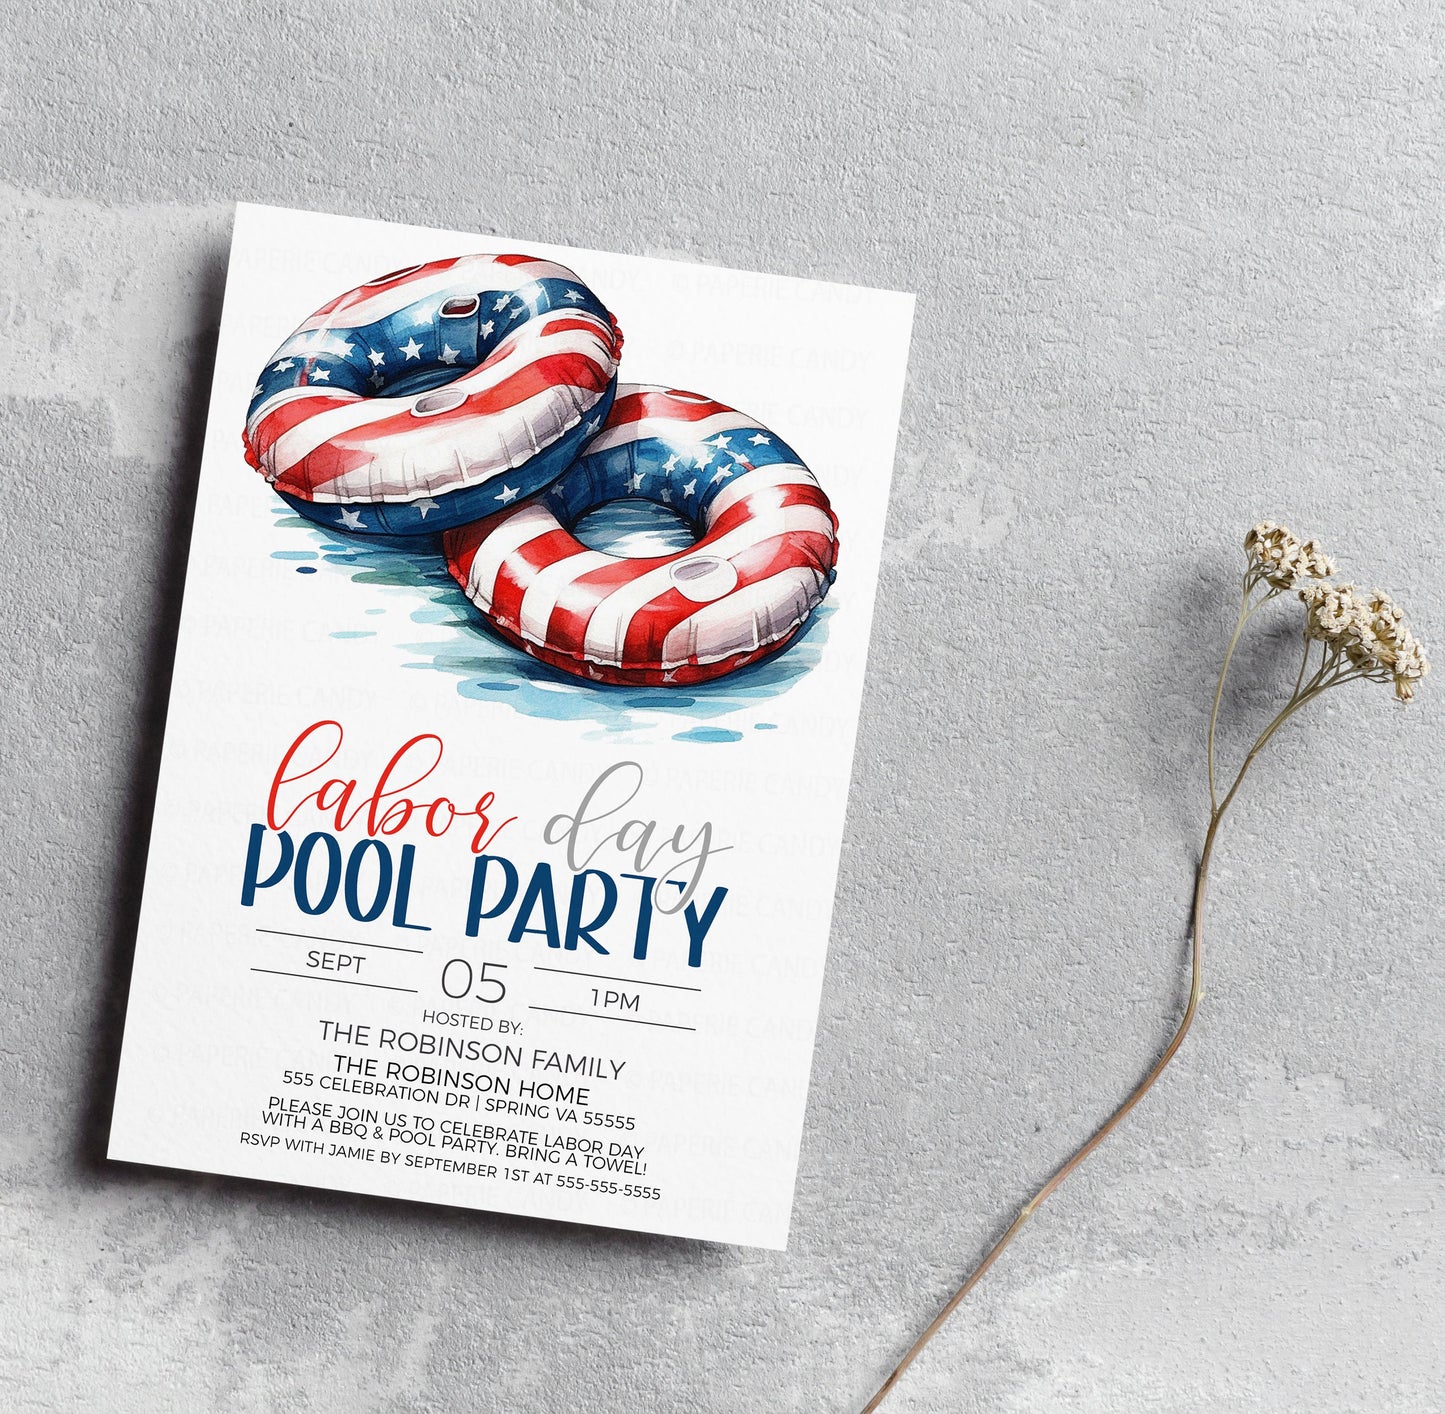 Labor Day Pool Party Invitation, Labor Day Pool Invite, Labor Day BBQ Fireworks Pool Party, Patriotic Pool Party Editable Printable Template